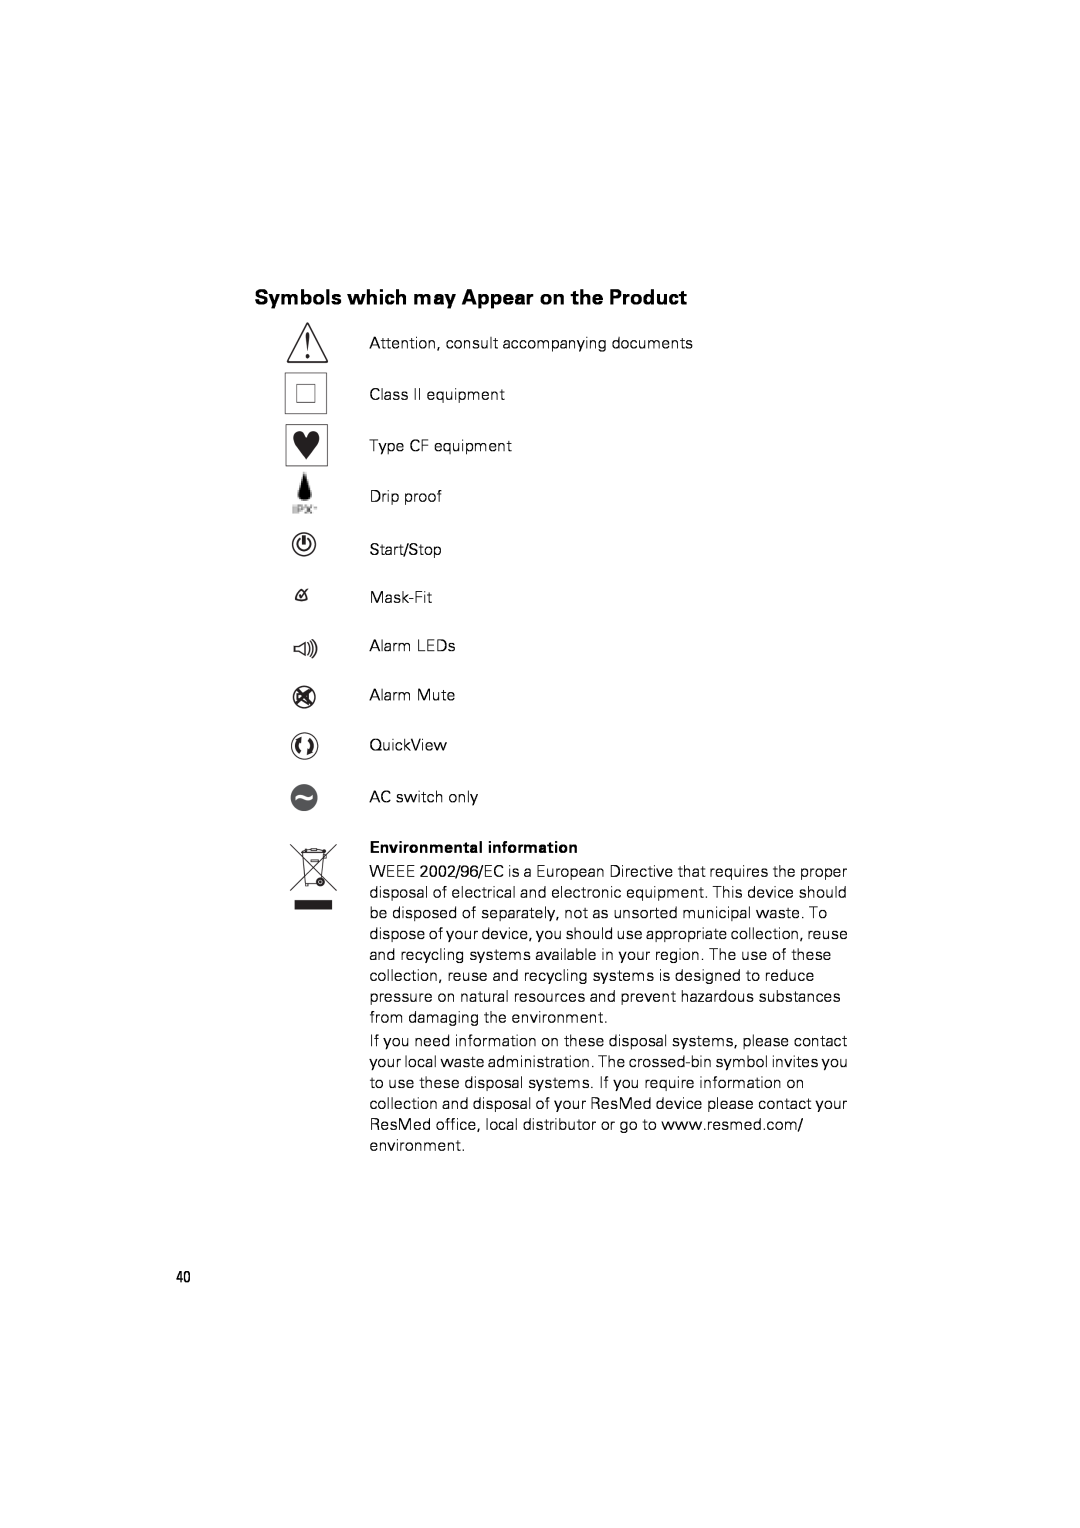 ResMed III ST-A user manual Symbols which may Appear on the Product, Environmental information 